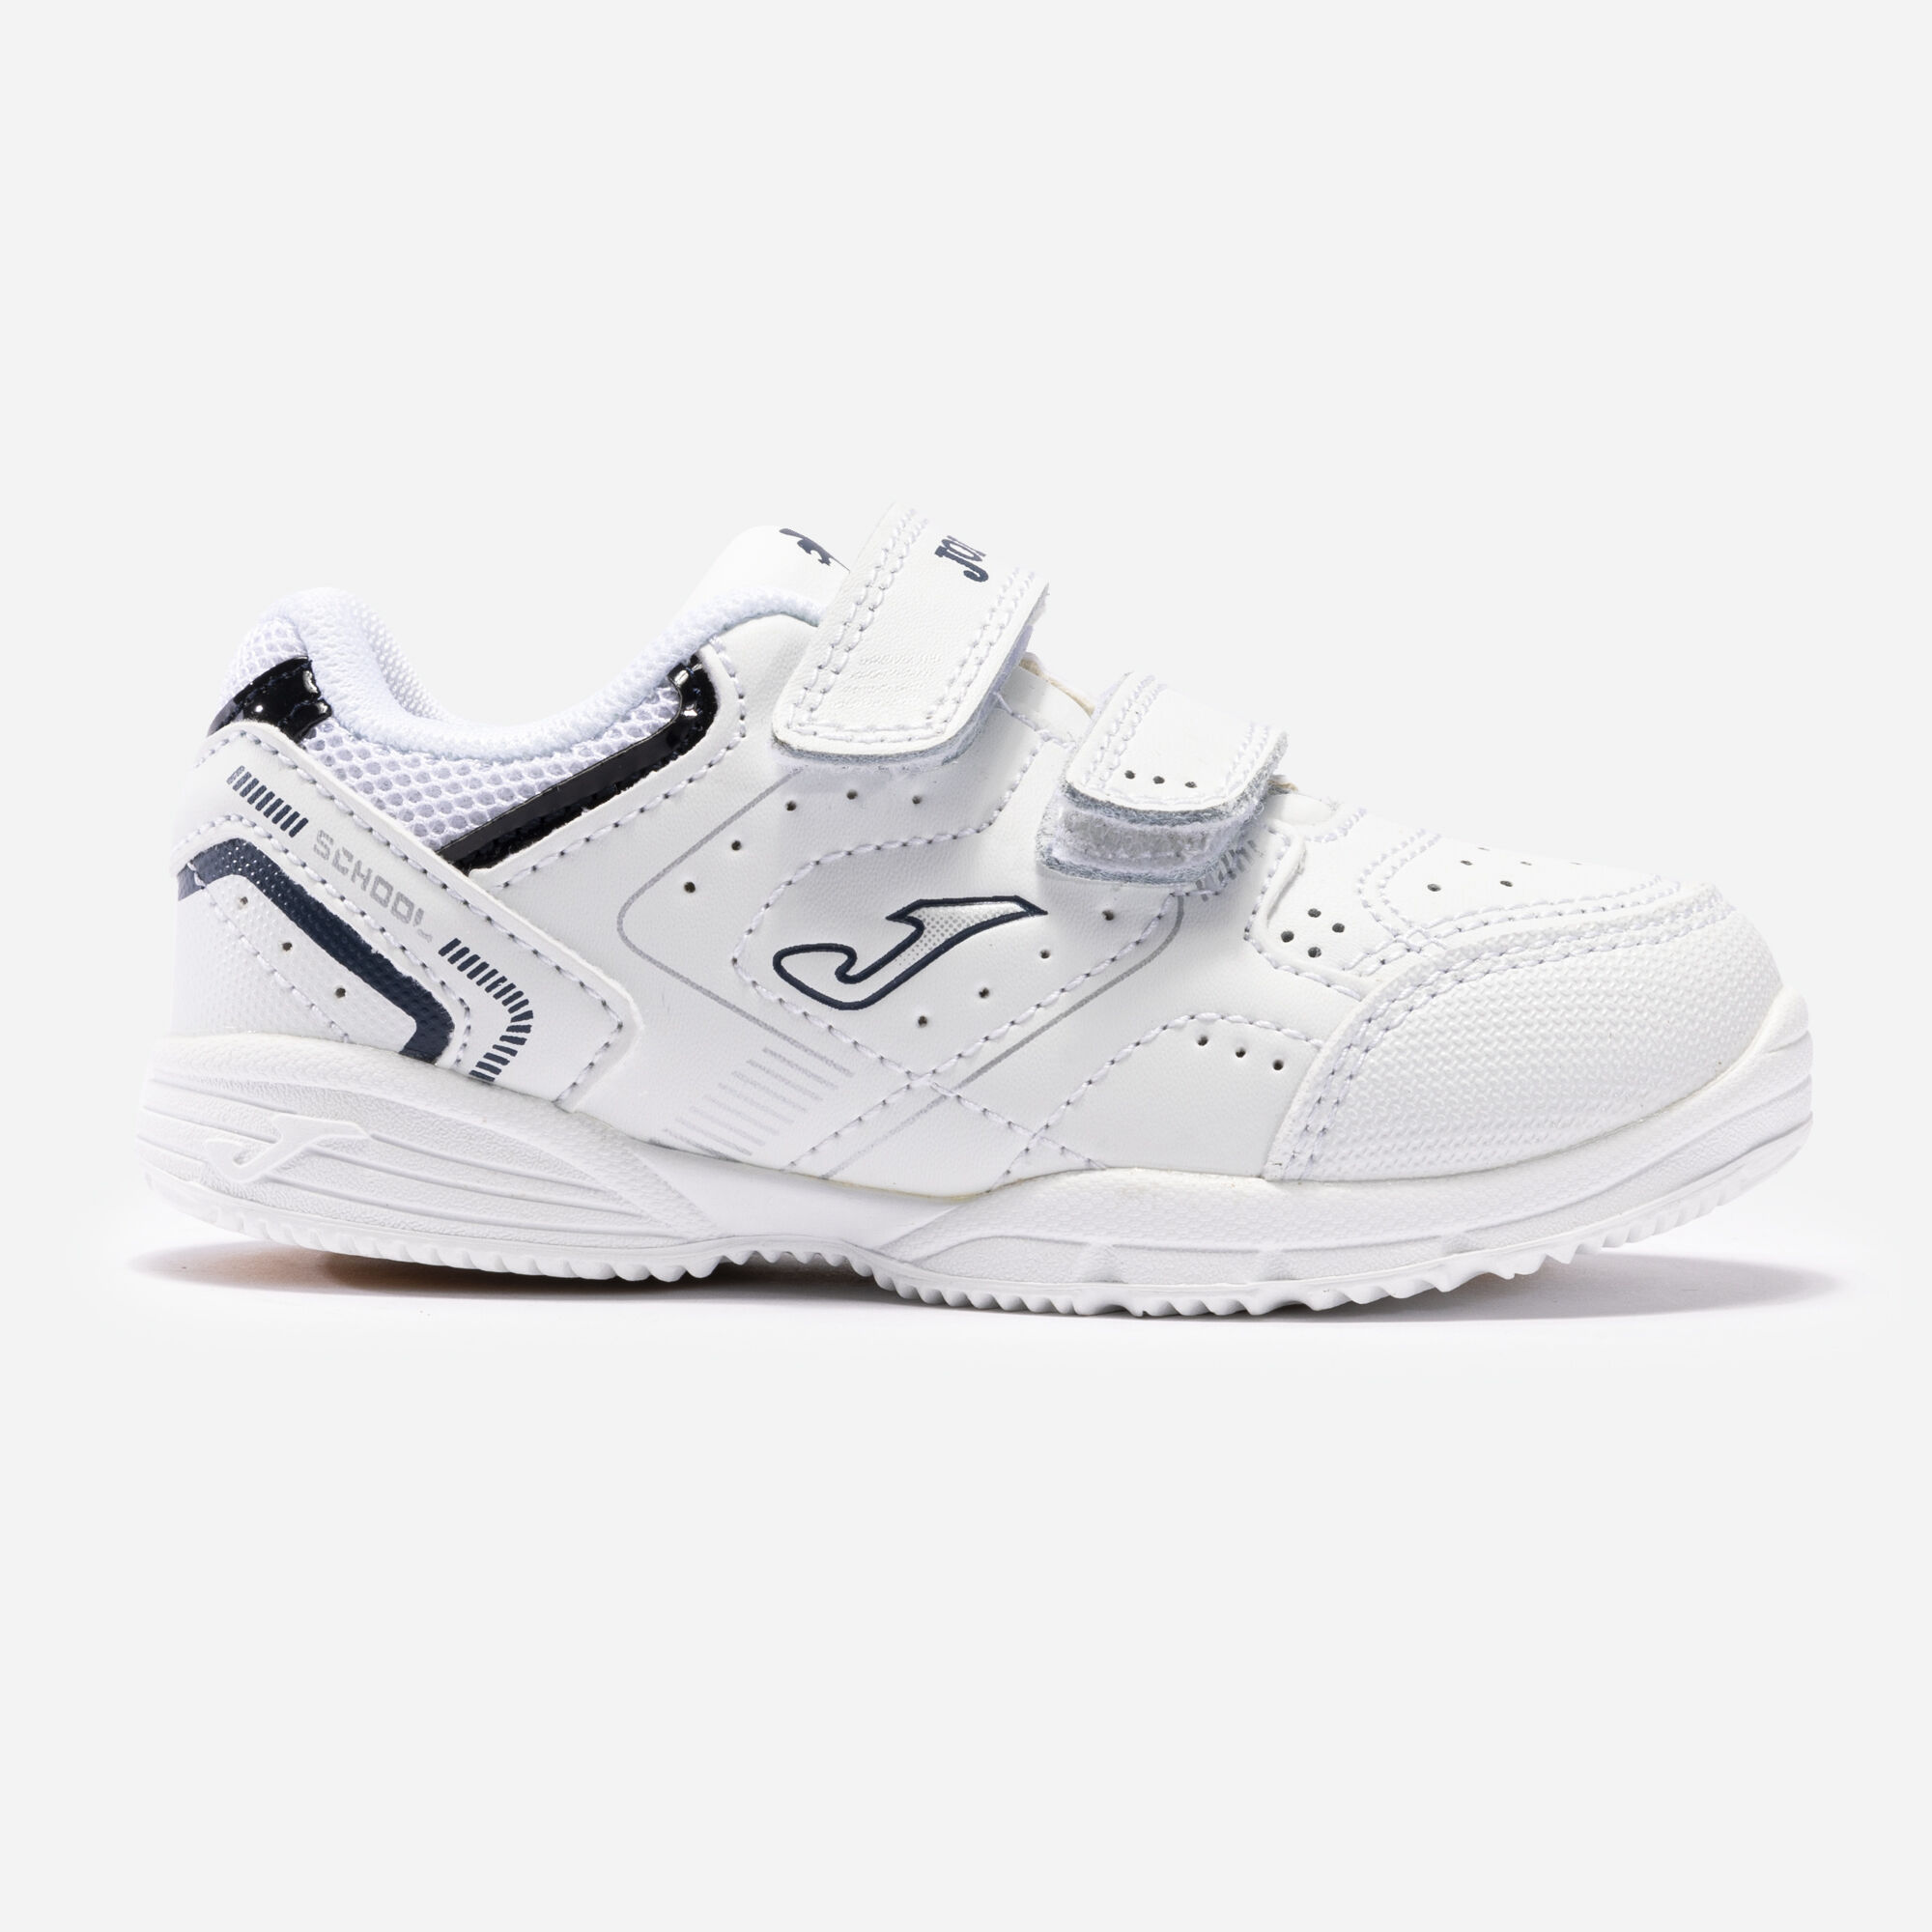 CASUAL SHOES SCHOOL 21 JUNIOR WHITE NAVY BLUE